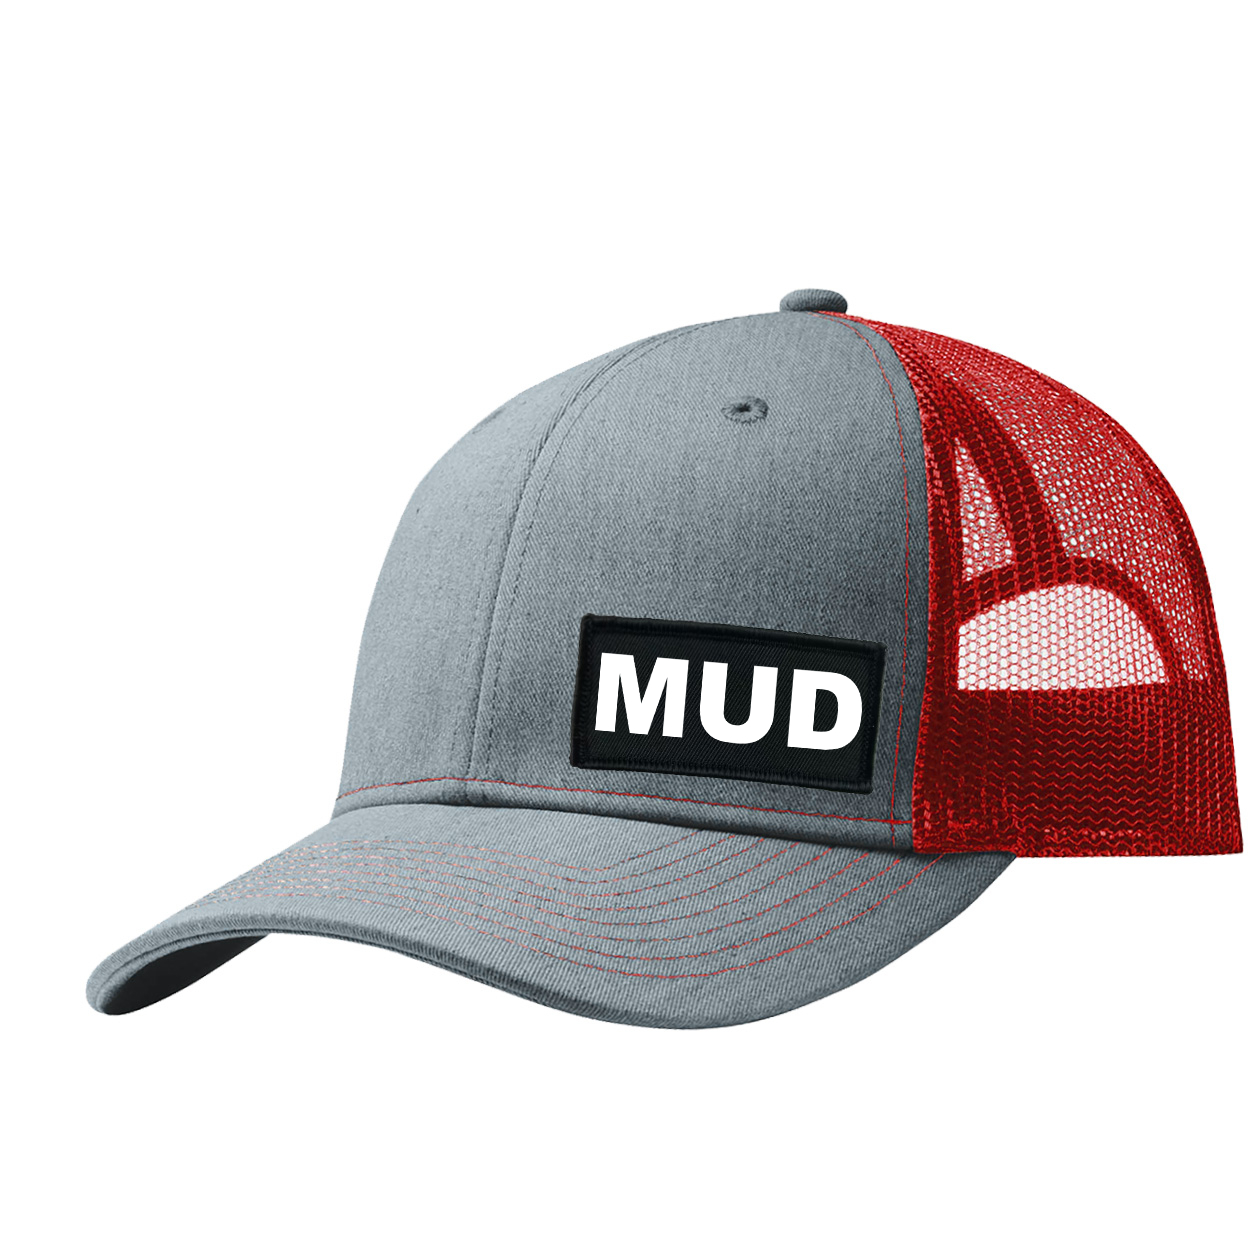 Mud Brand Logo Night Out Woven Patch Snapback Trucker Hat Heather Heather Grey/Red 